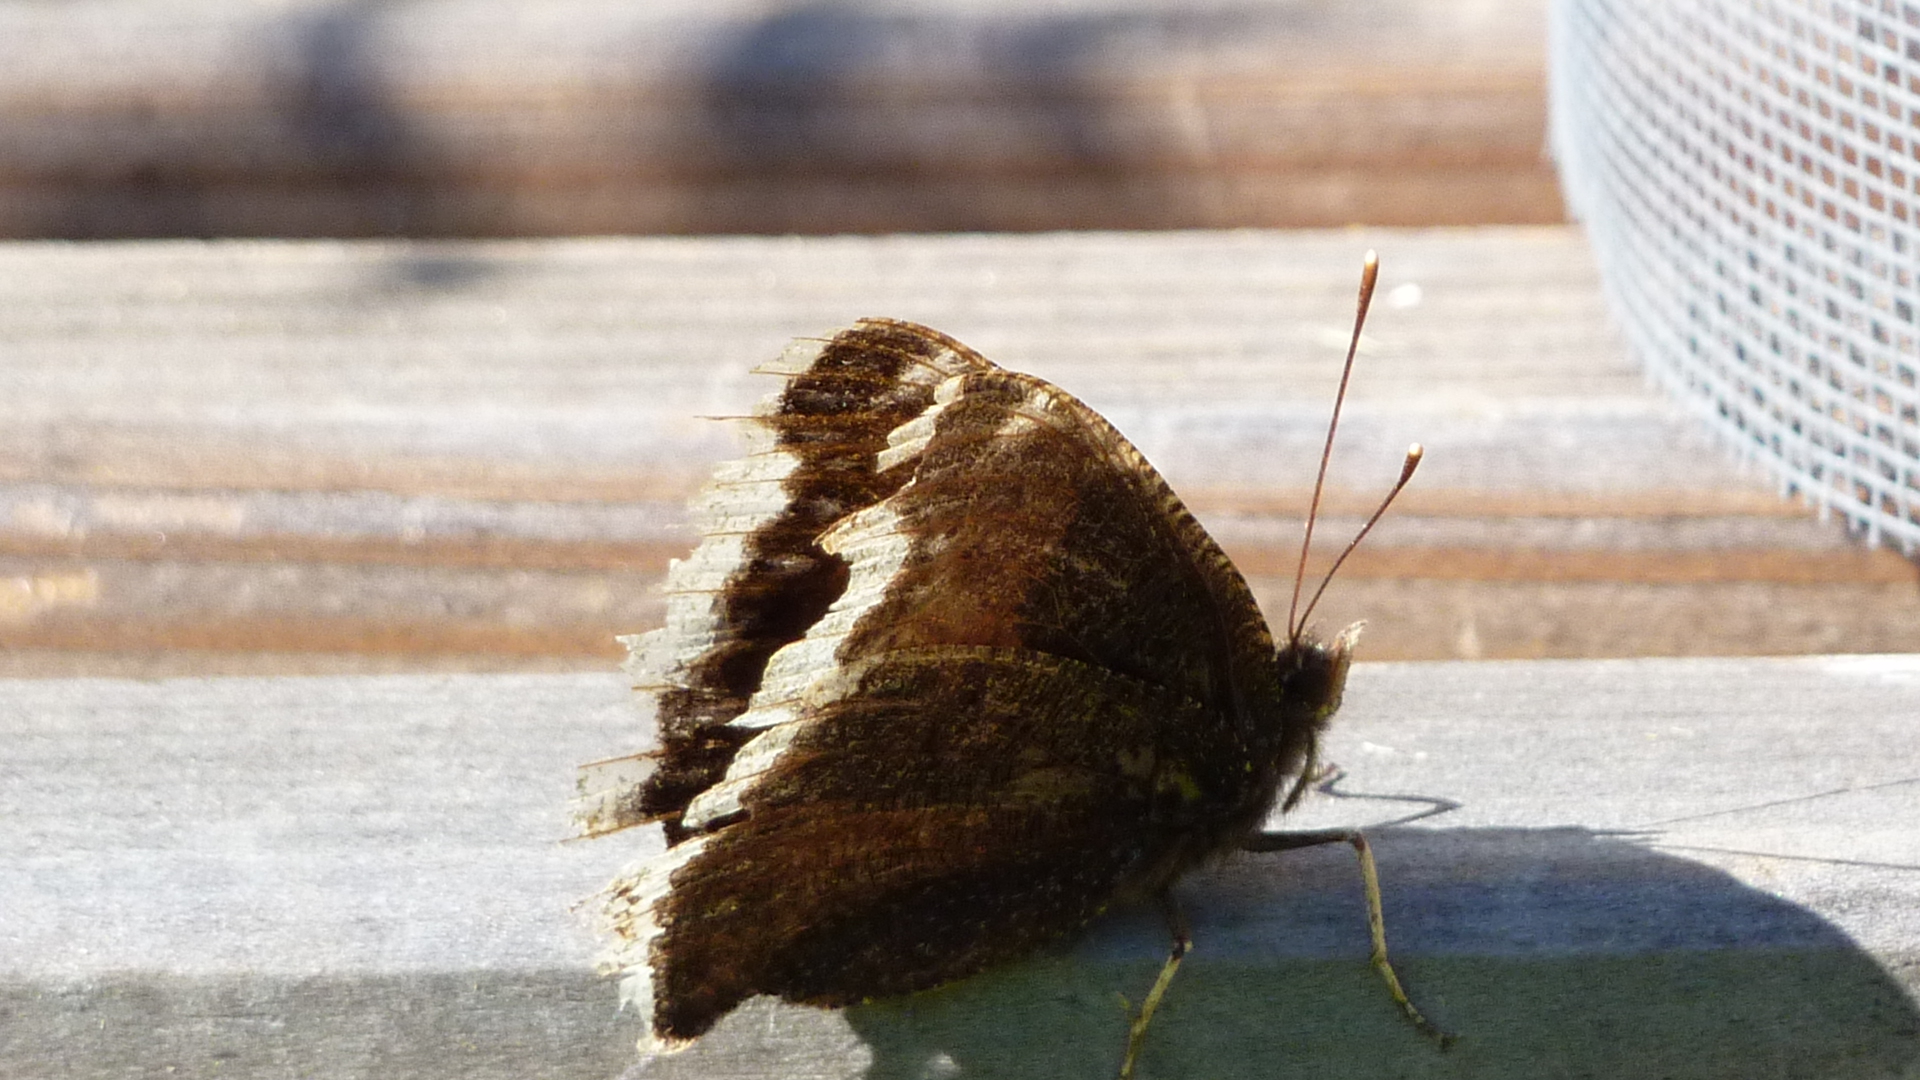 Mourning Cloak (Seems to have had a rough life)